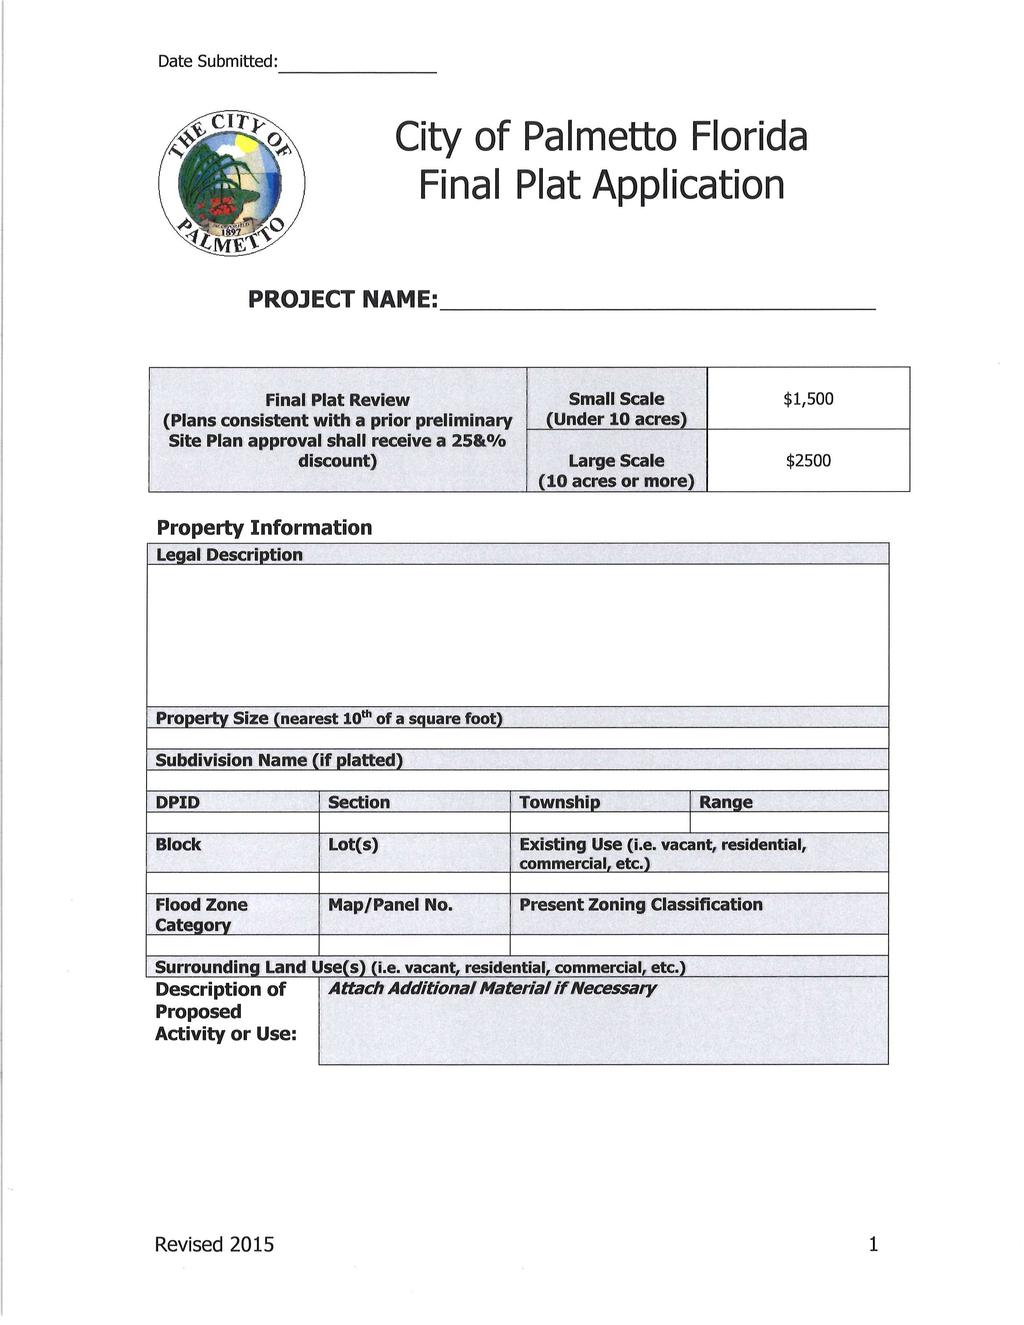 Date Submitted: CIT A9LME o City of Palmetto Florida Final Plat Application PROJECT NAME: Final Plat Review Small Scale 1, 500 Plans consistent with a prior preliminary Under 10 acres) Site Plan